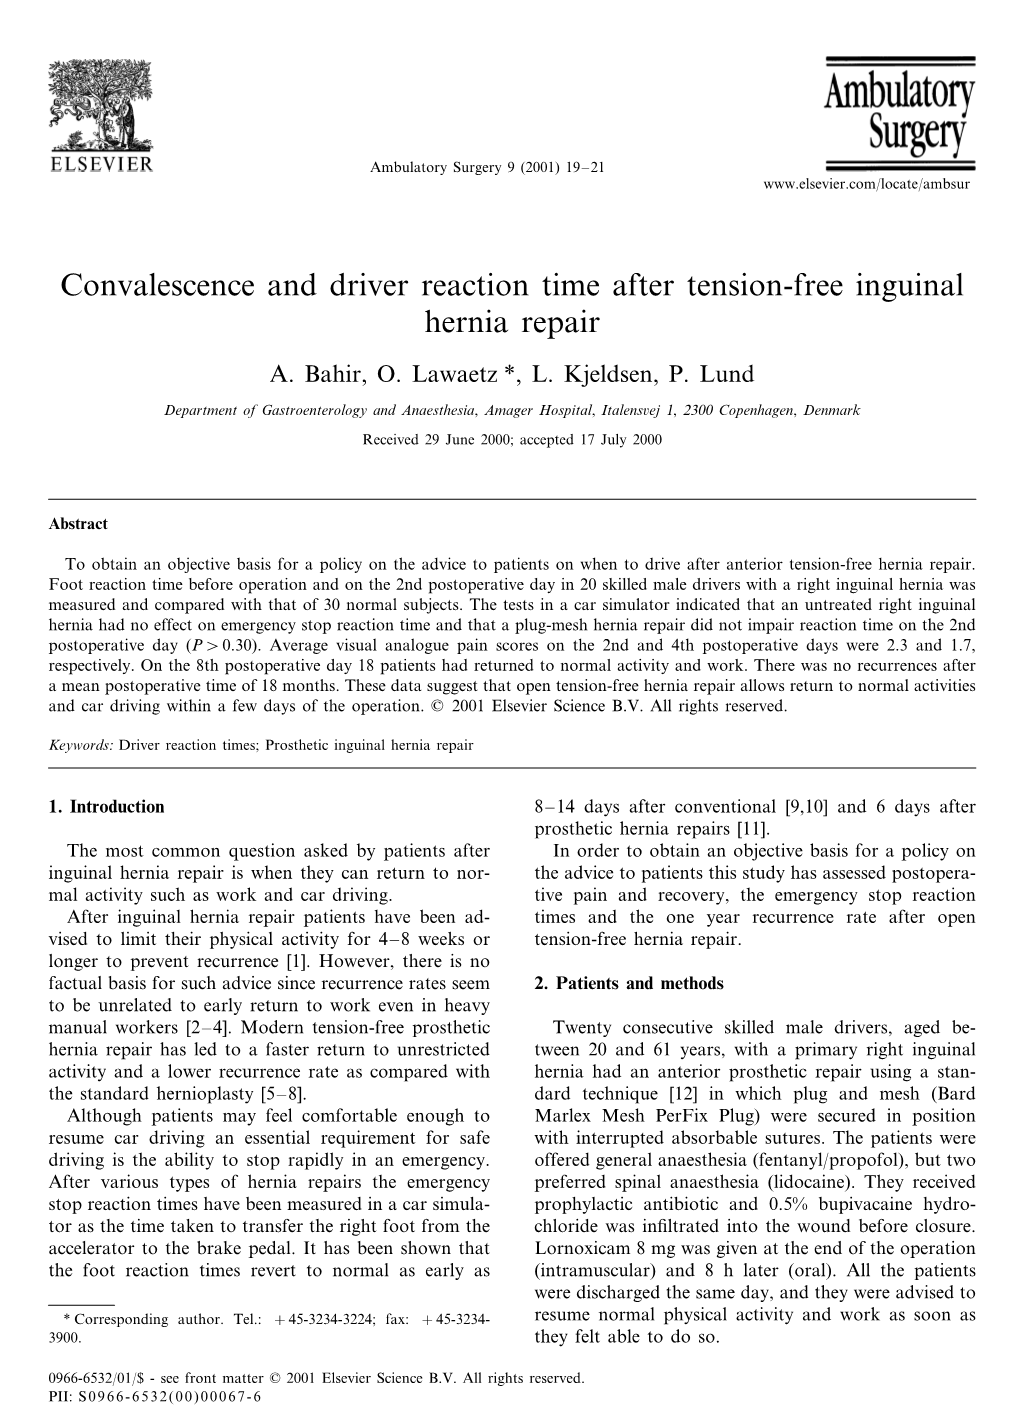 Convalescence and Driver Reaction Time After Tension-Free Inguinal Hernia Repair